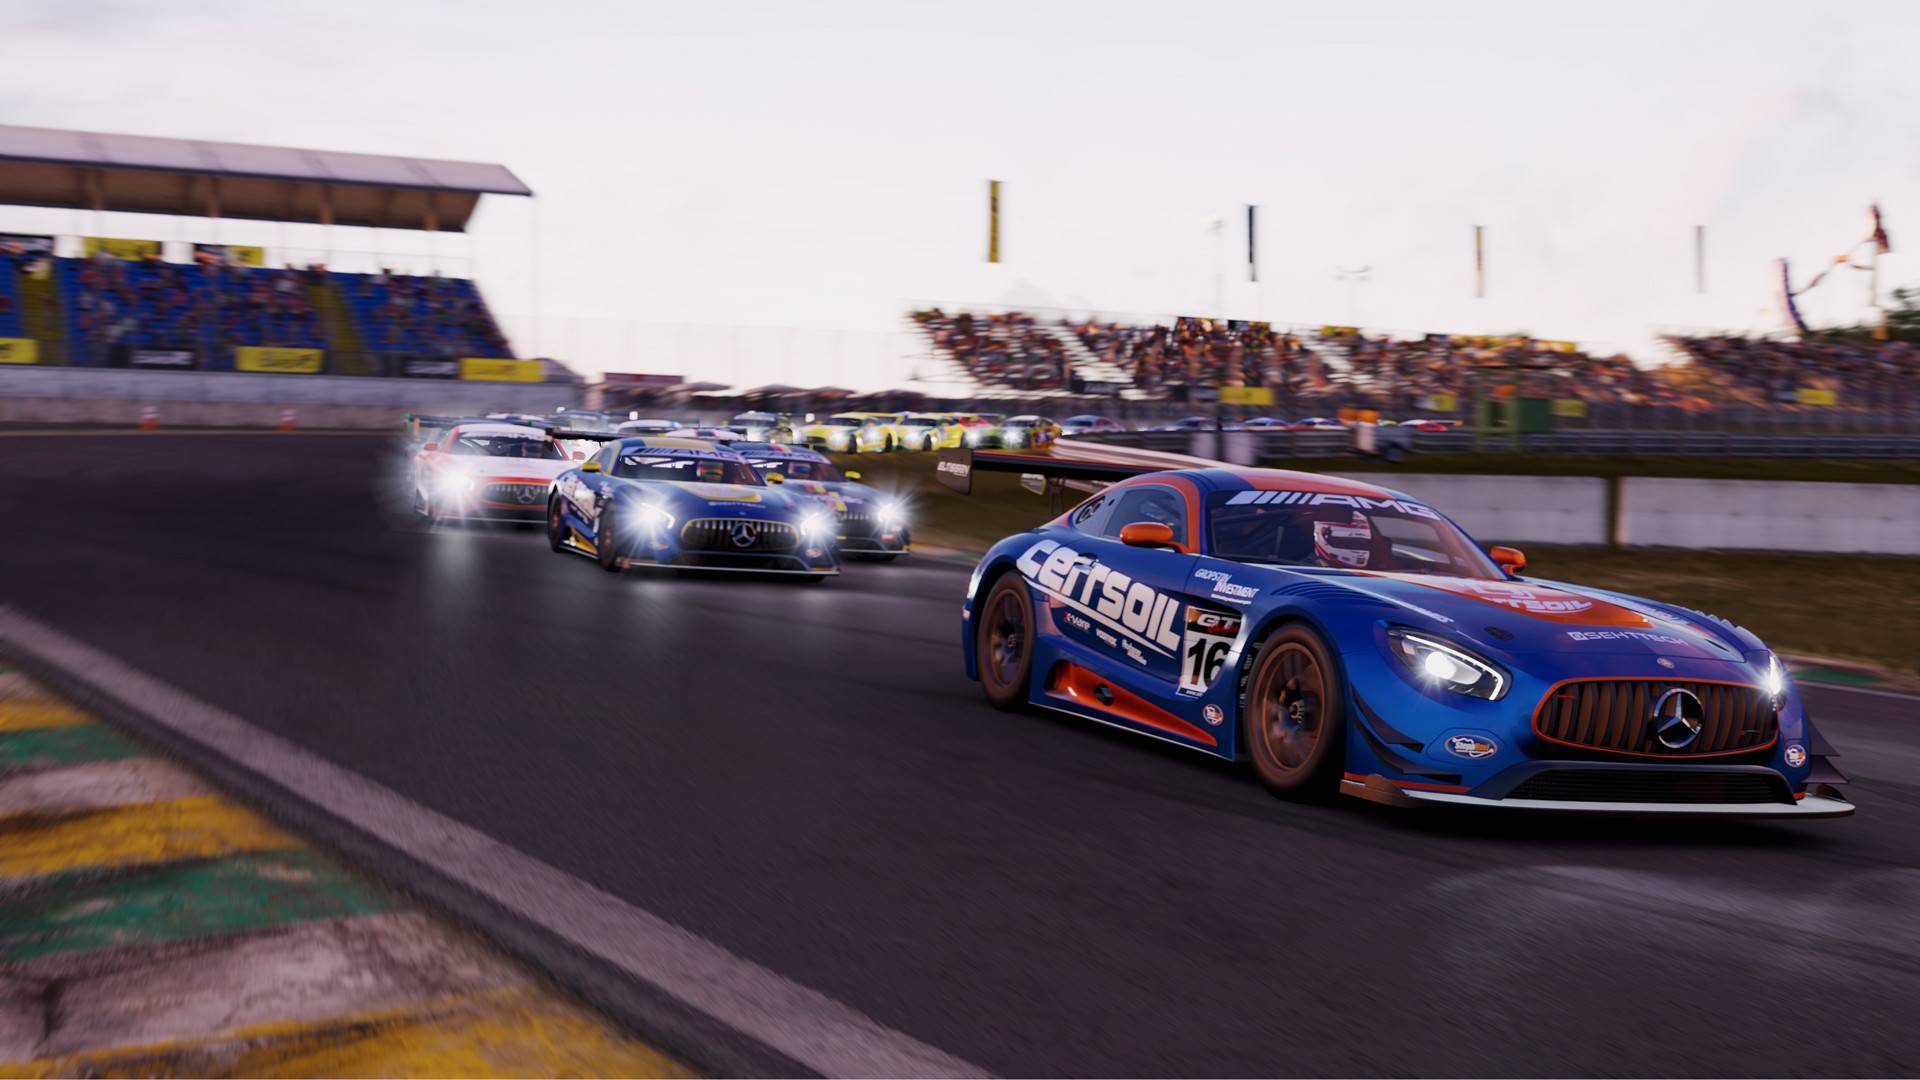 Project Cars 3 - Microsoft Xbox One for sale online